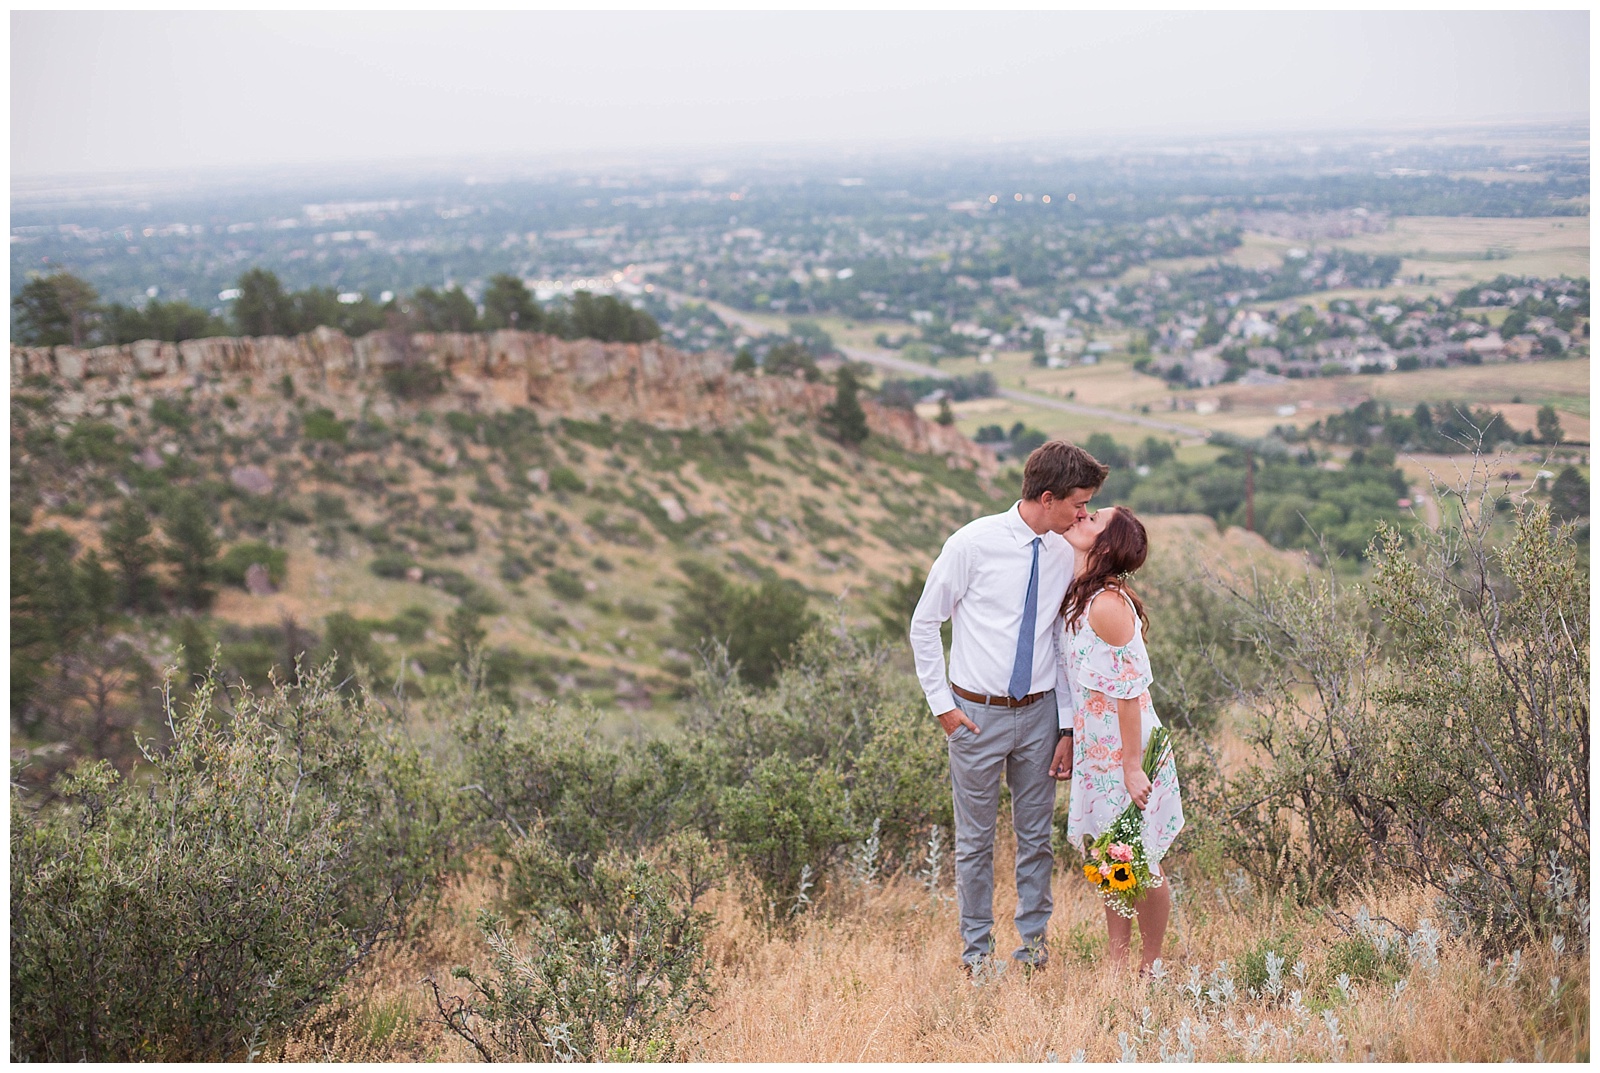 Colorado Sunset Engagement Session | Monica Brown Photography | monicabrownphoto.com